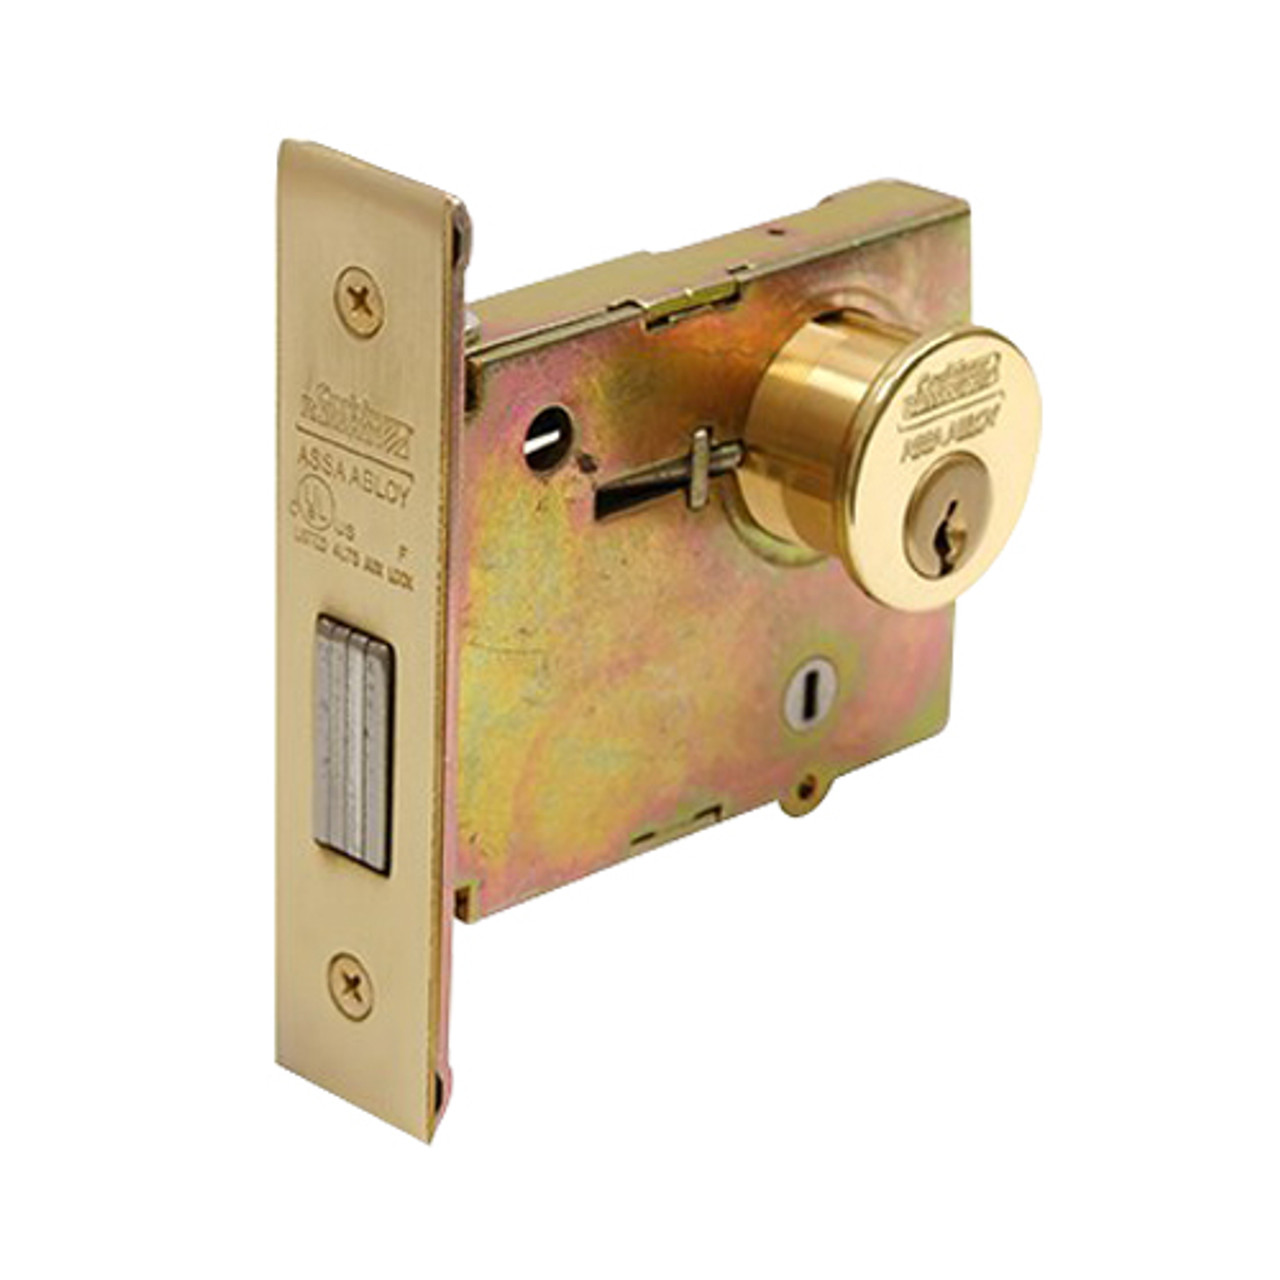 DL4122-605 Corbin DL4100 Series Mortise Deadlocks with Double Cylinder w/ Thumbturn in Bright Brass Finish